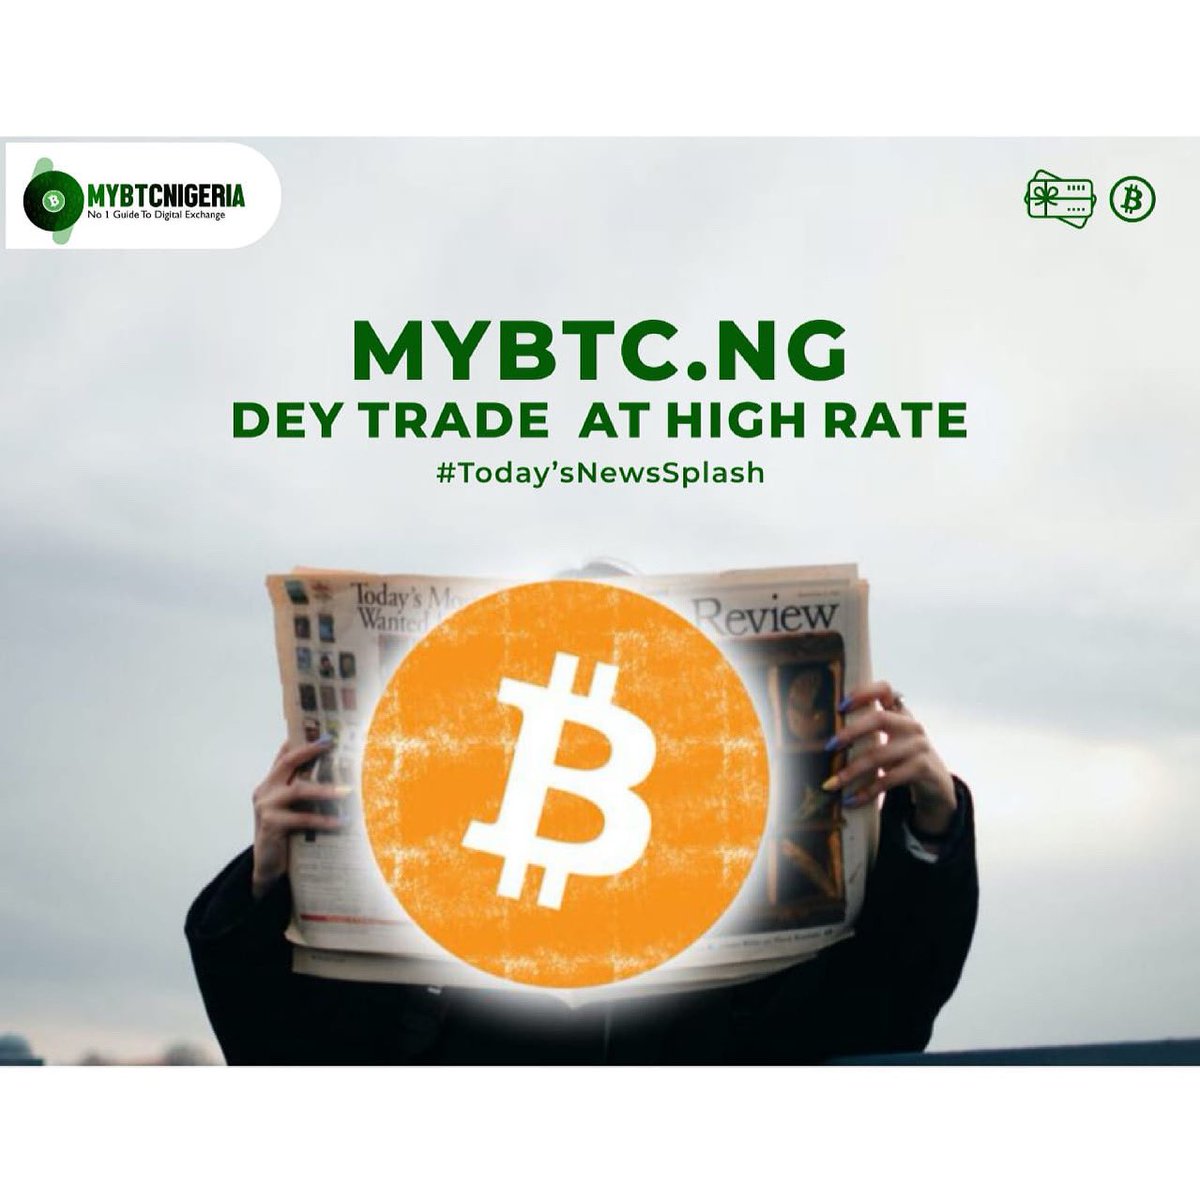 The joy of trading is Good rate 😉
Our rates are high at Mybtc.ng 

@btc_nigeria  is actively buying Bitcoin and giftcards 24/7 at the sweetest rates with instant Naira payment right now 💸🔥

Log on to Mybtc.ng today 😉
 #MyBtcNg #cryptocurrency